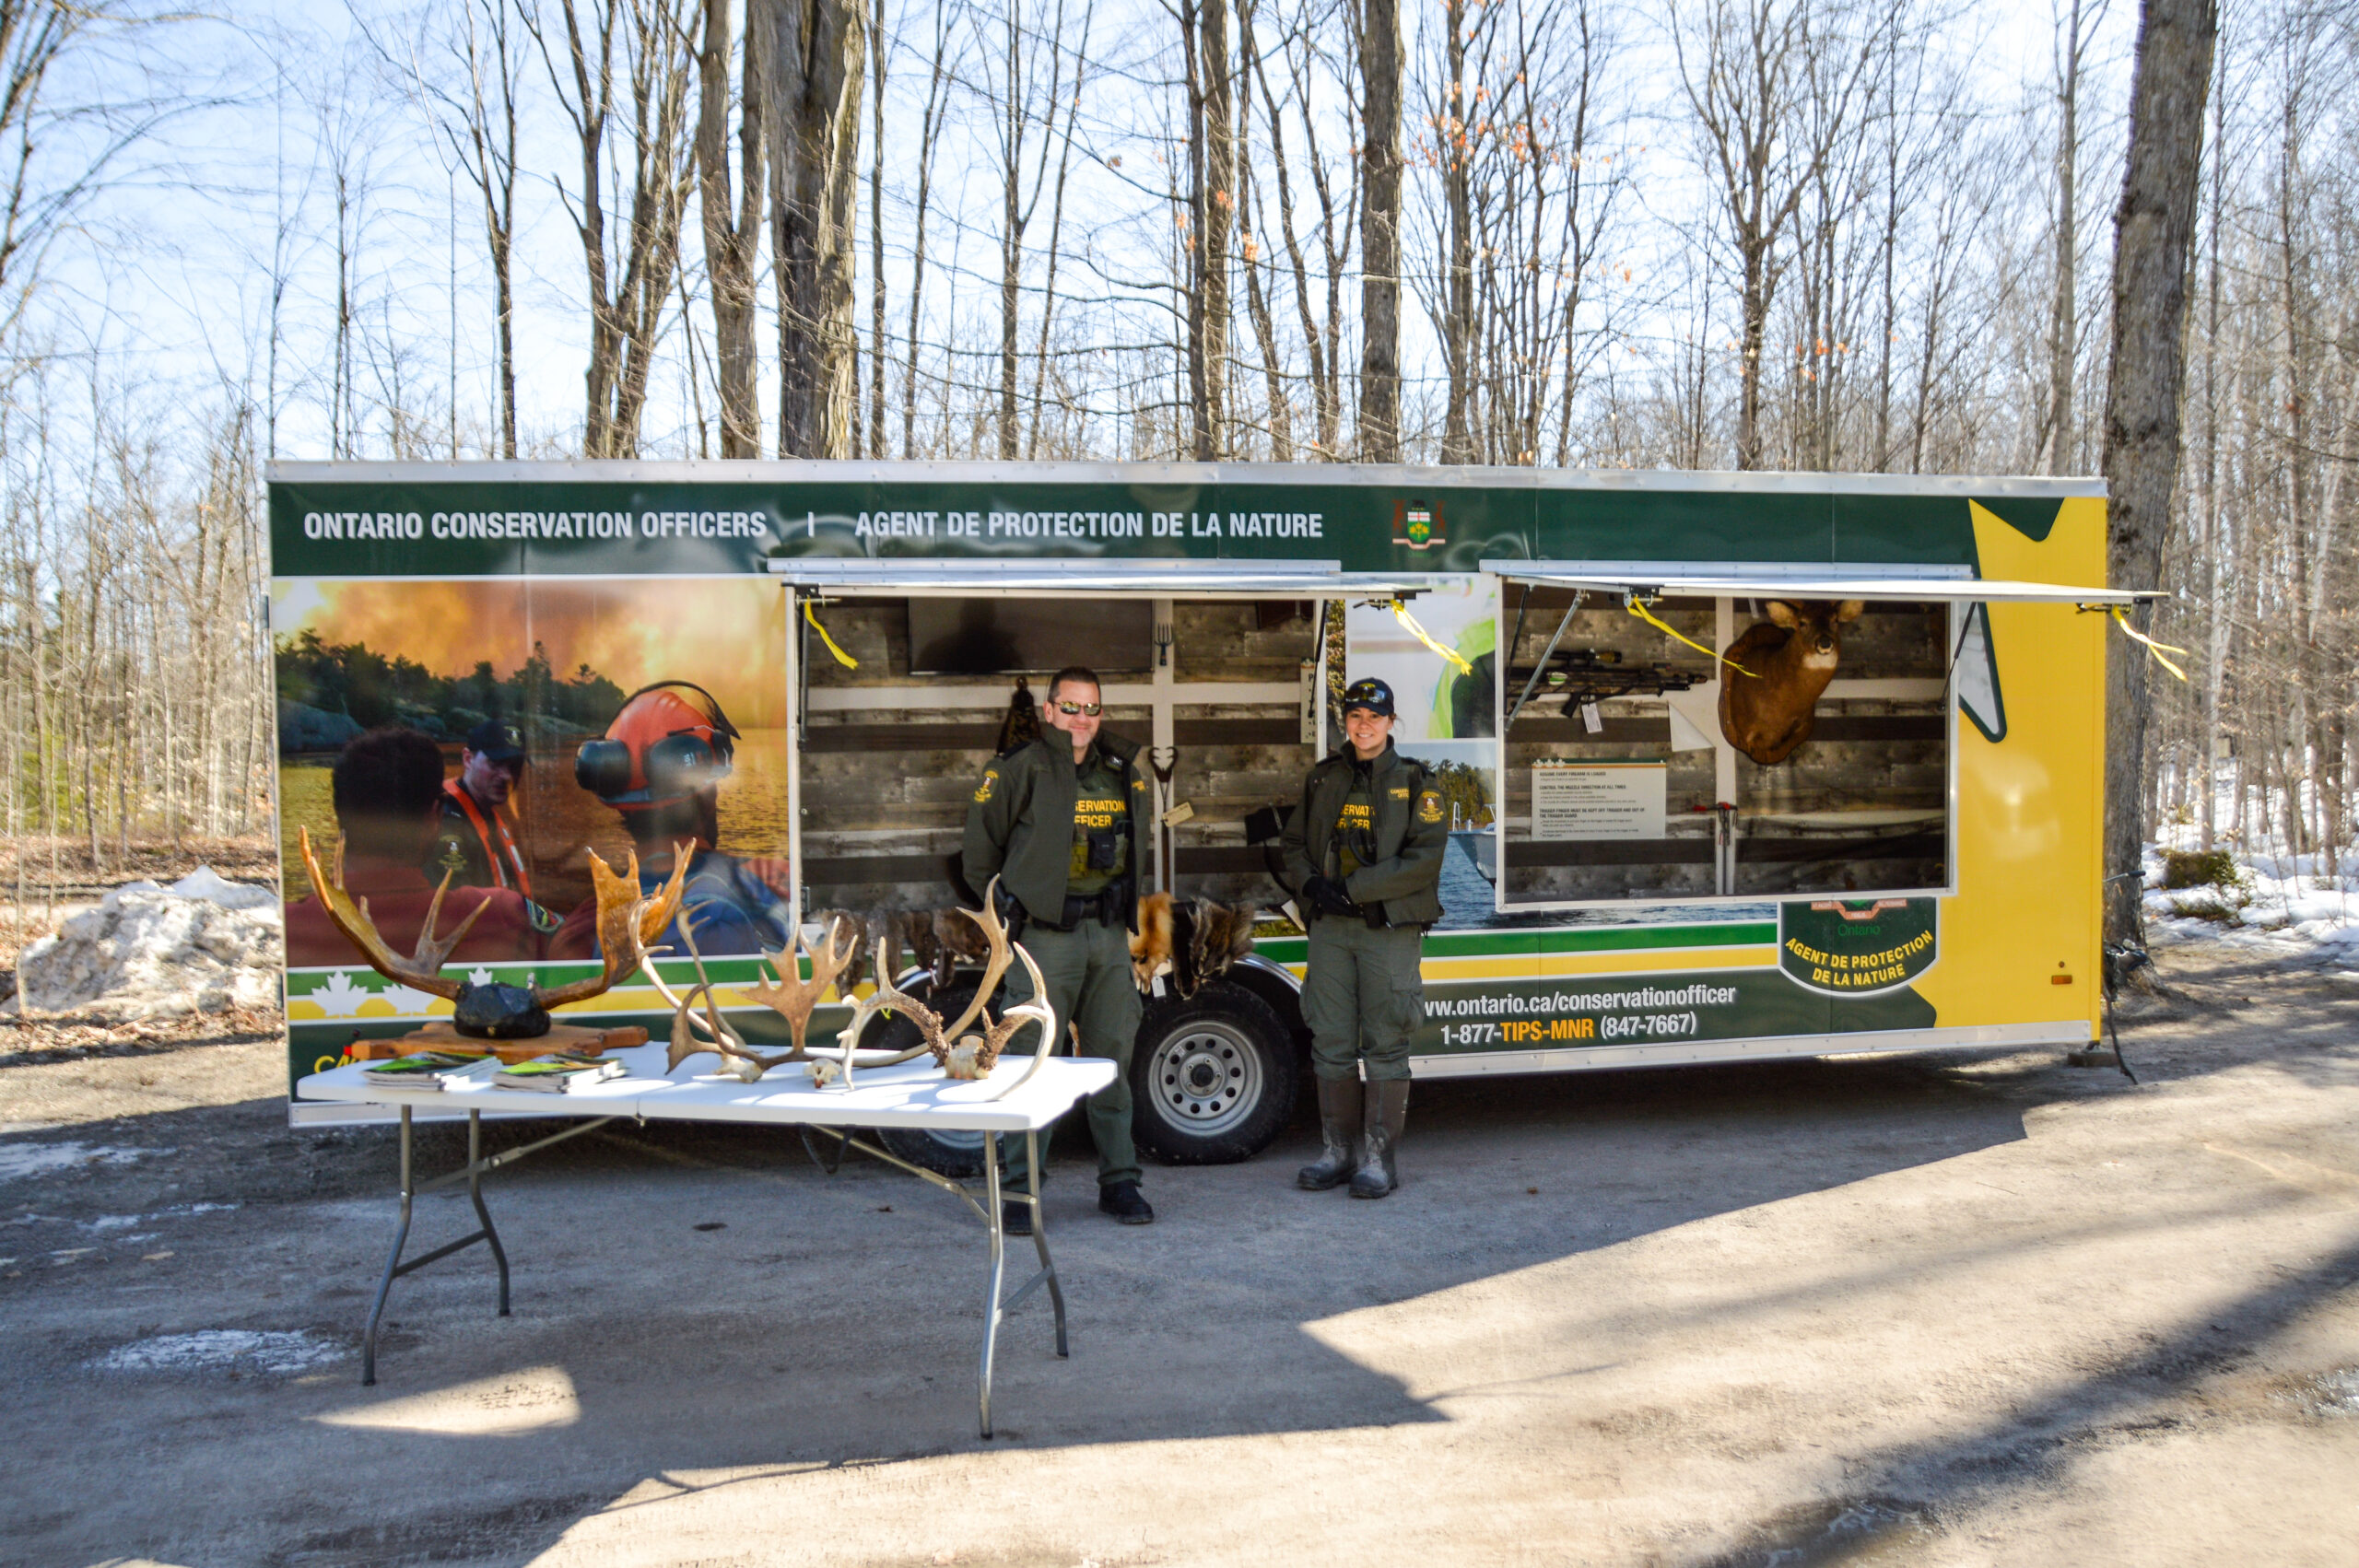 Army cadets next to their trailer with a display